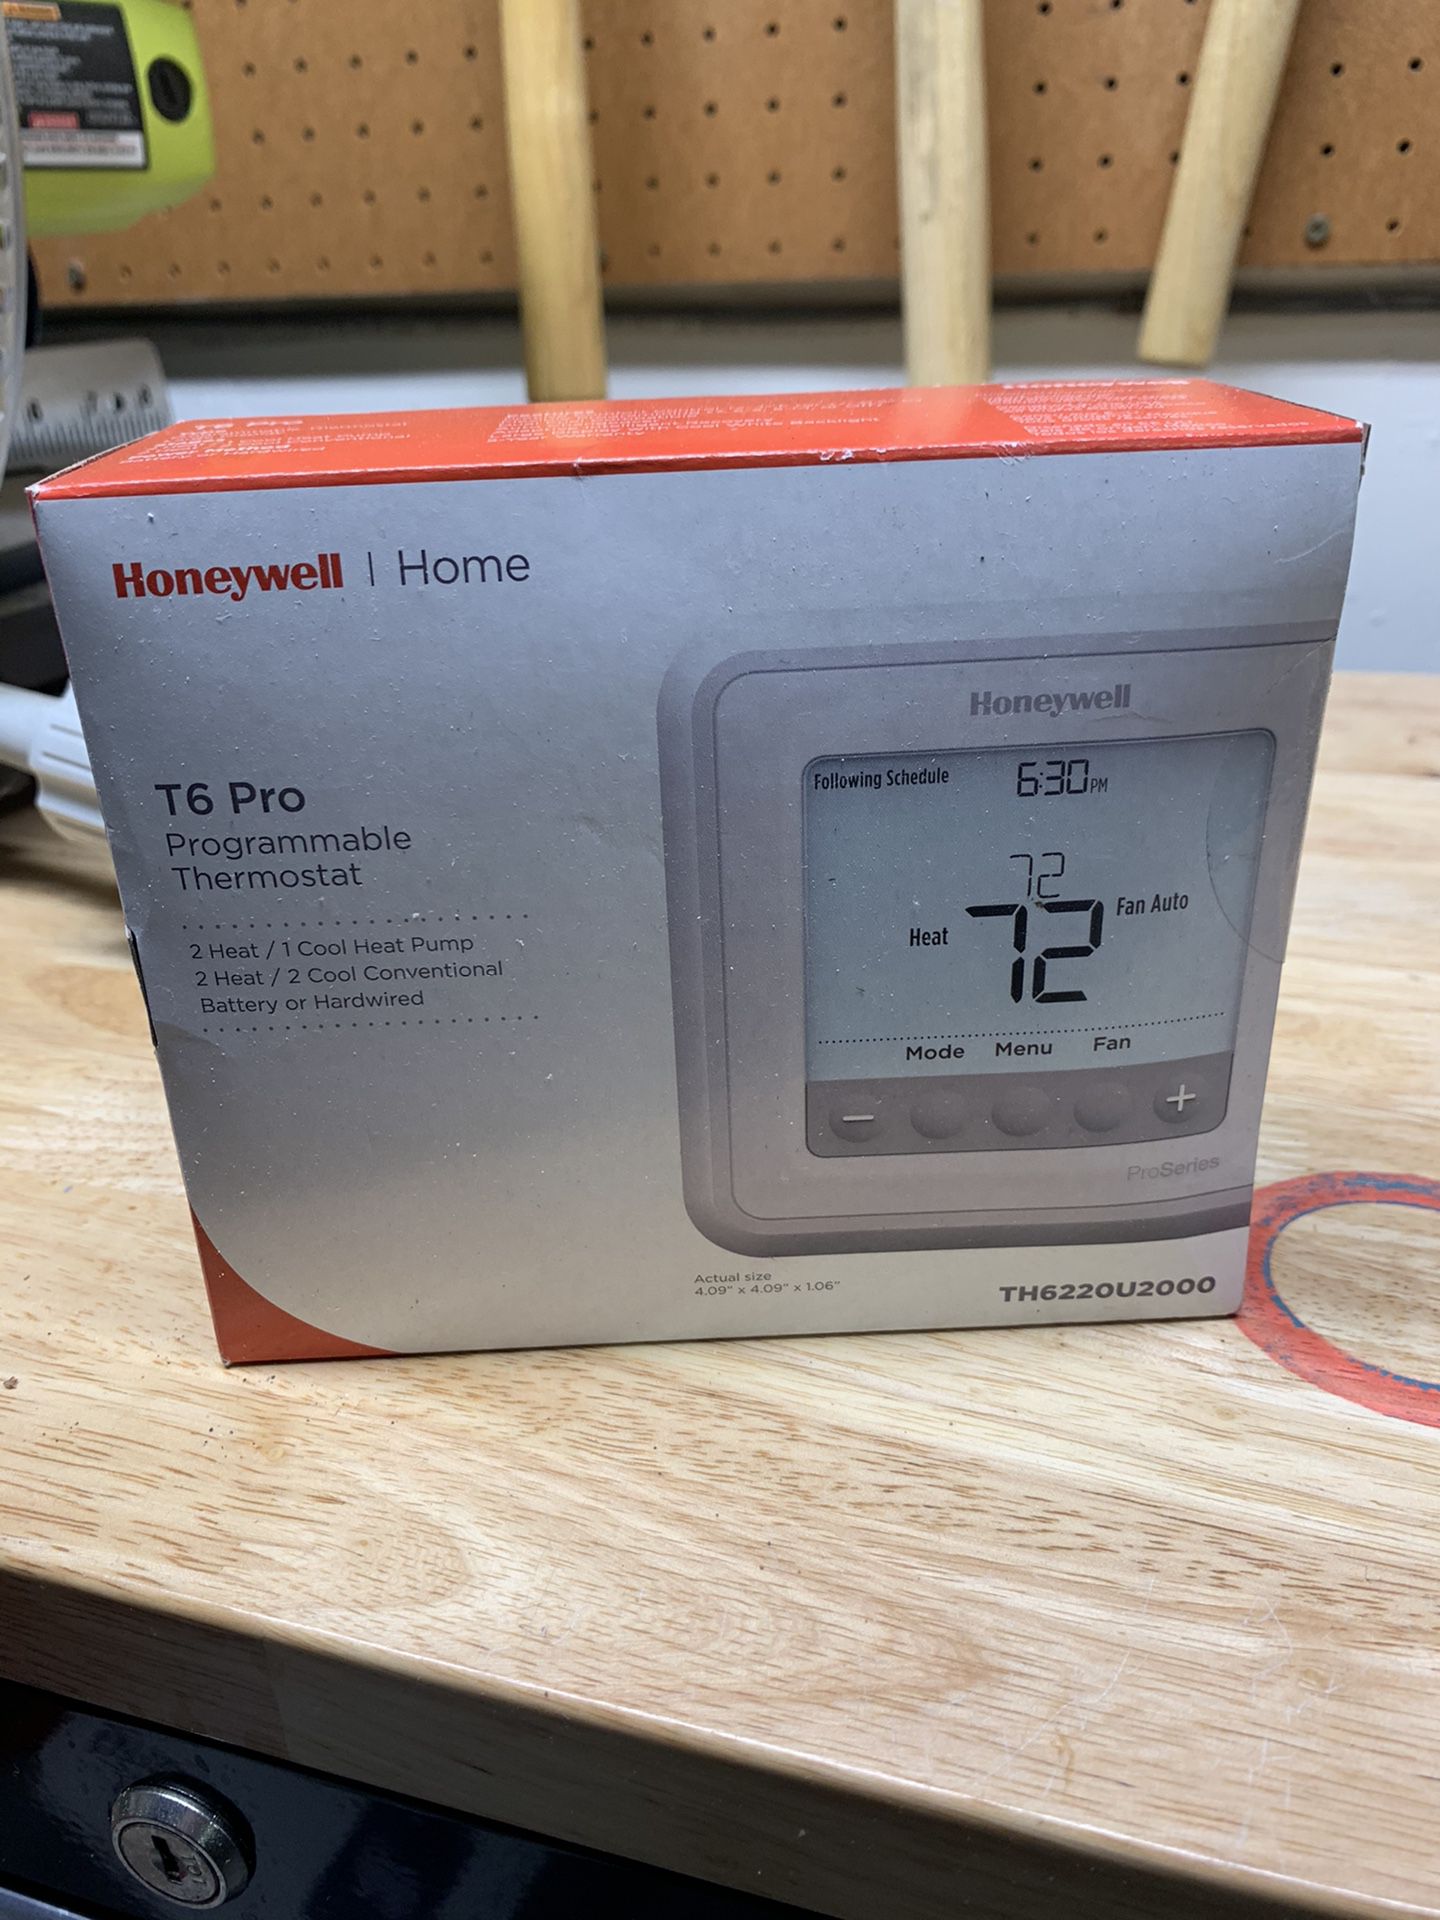 Honeywell t6 thermostat never used.